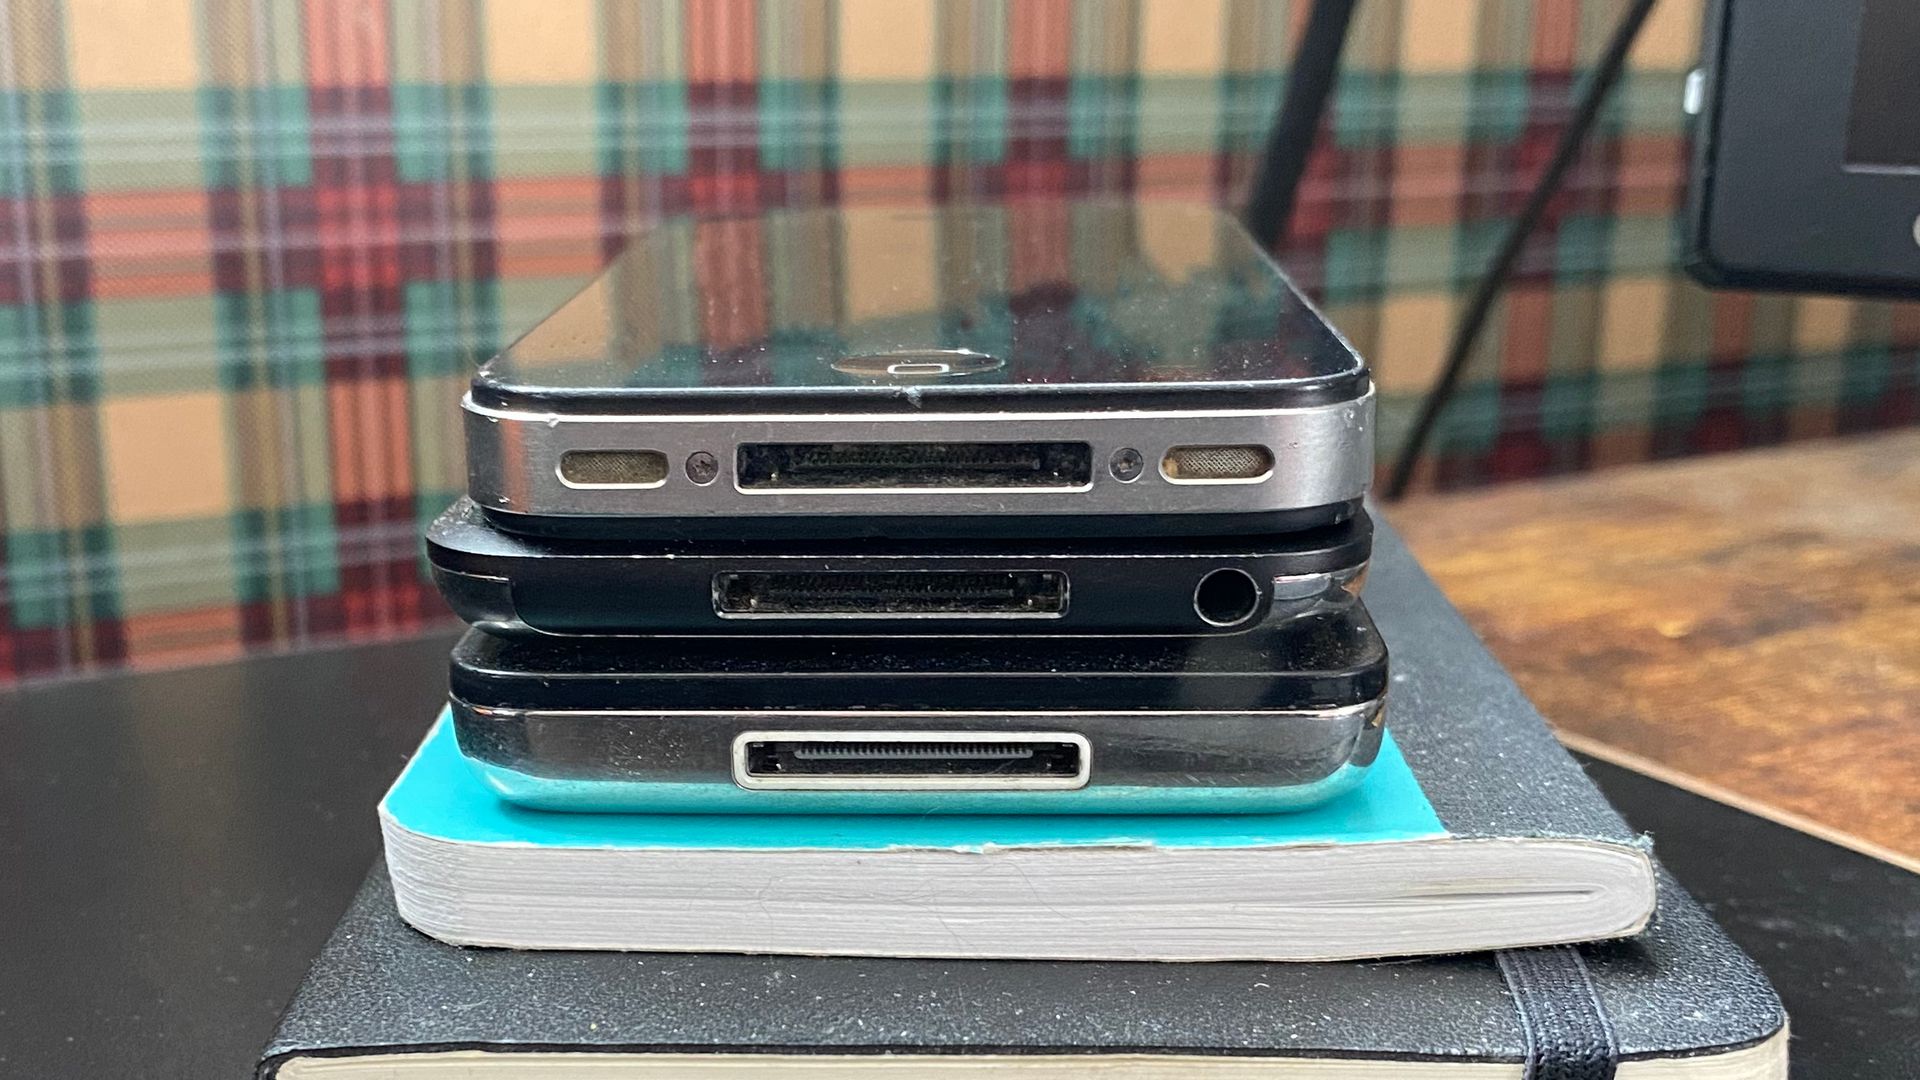 Three Apple devices that use the 30-pin connector stacked up.